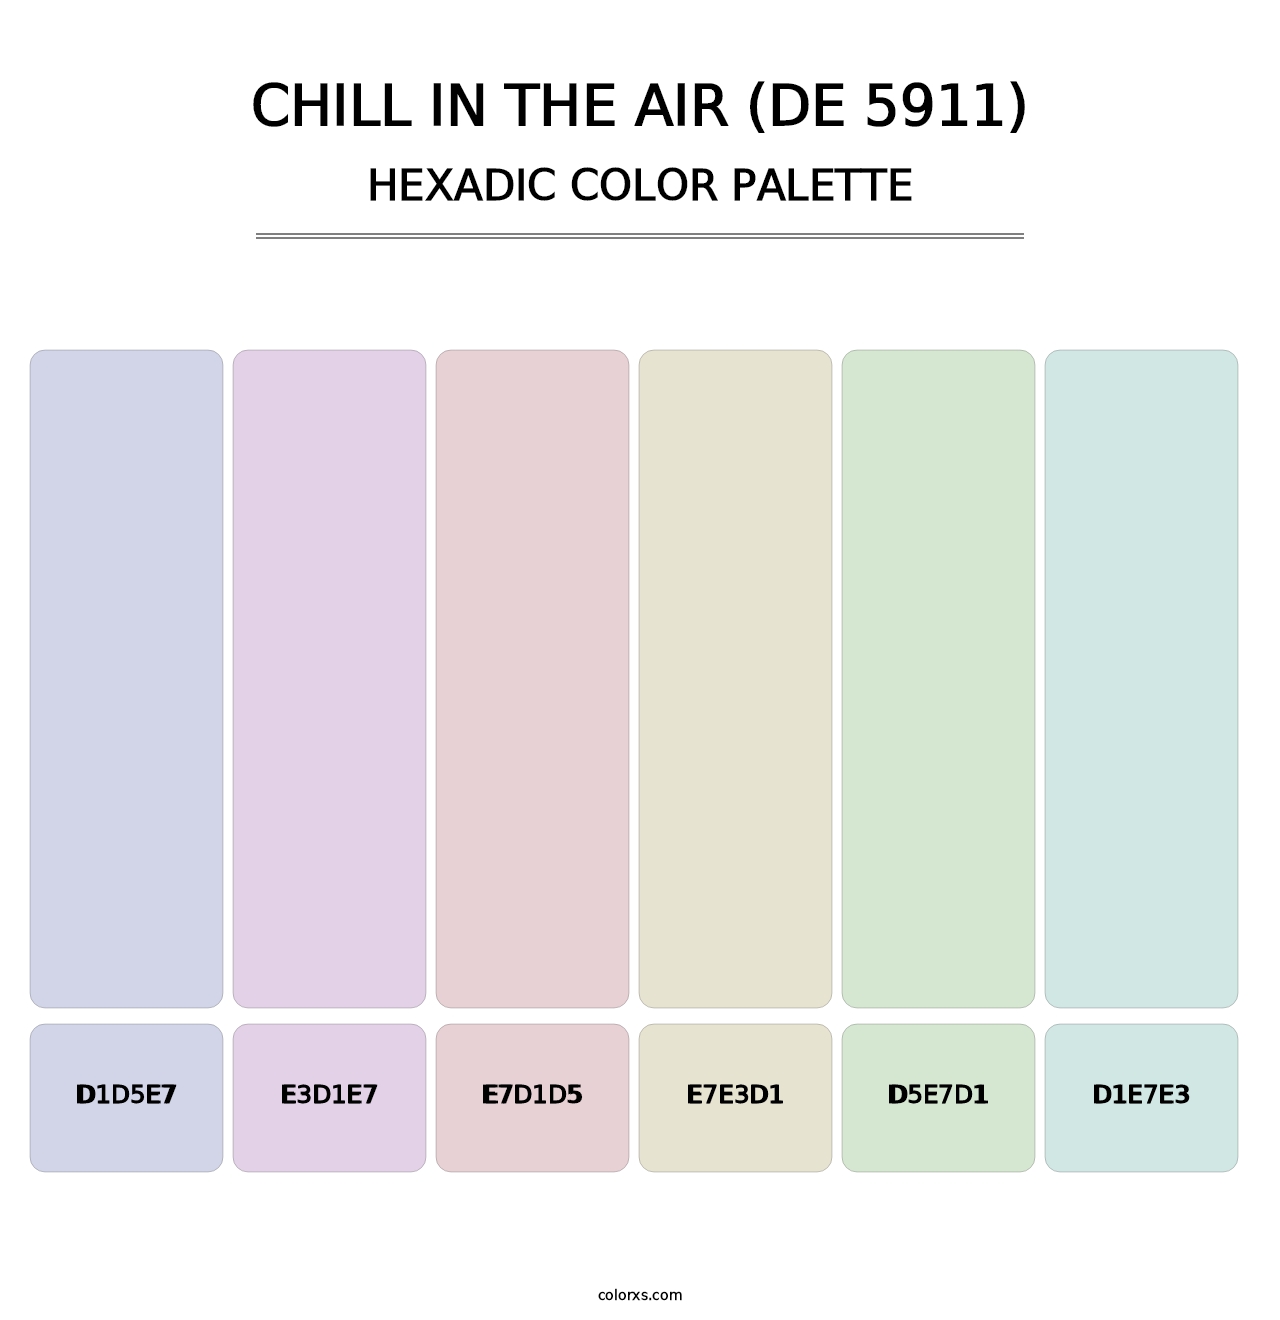 Chill in the Air (DE 5911) - Hexadic Color Palette